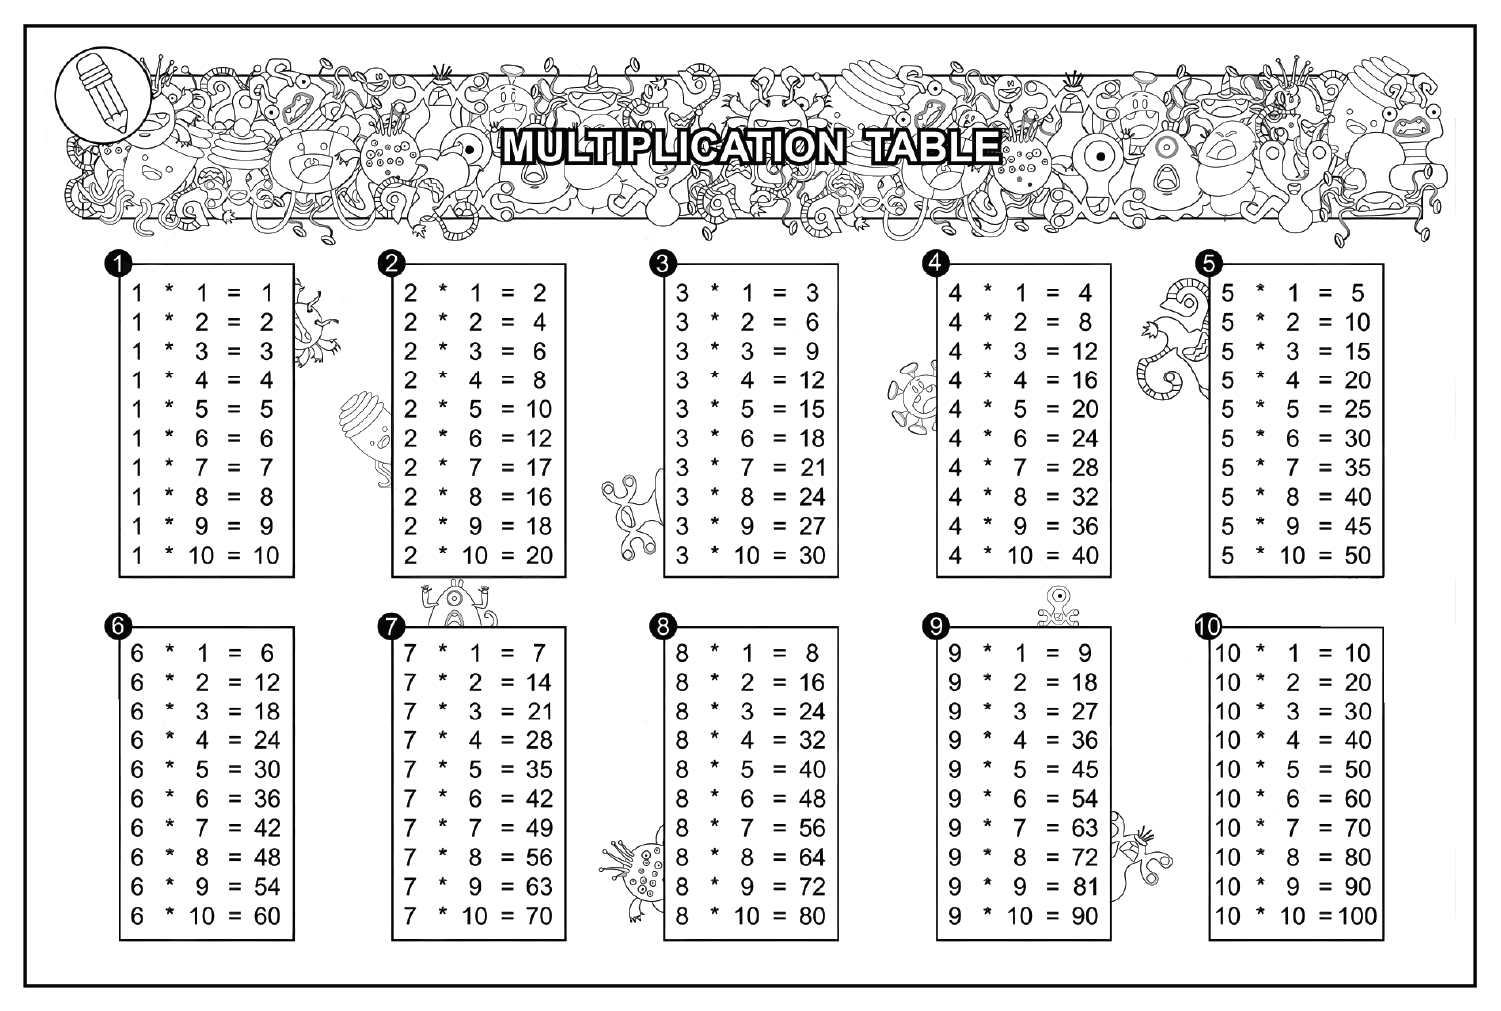 Multiplication Chart Coloring Page Free from Multiplication Chart